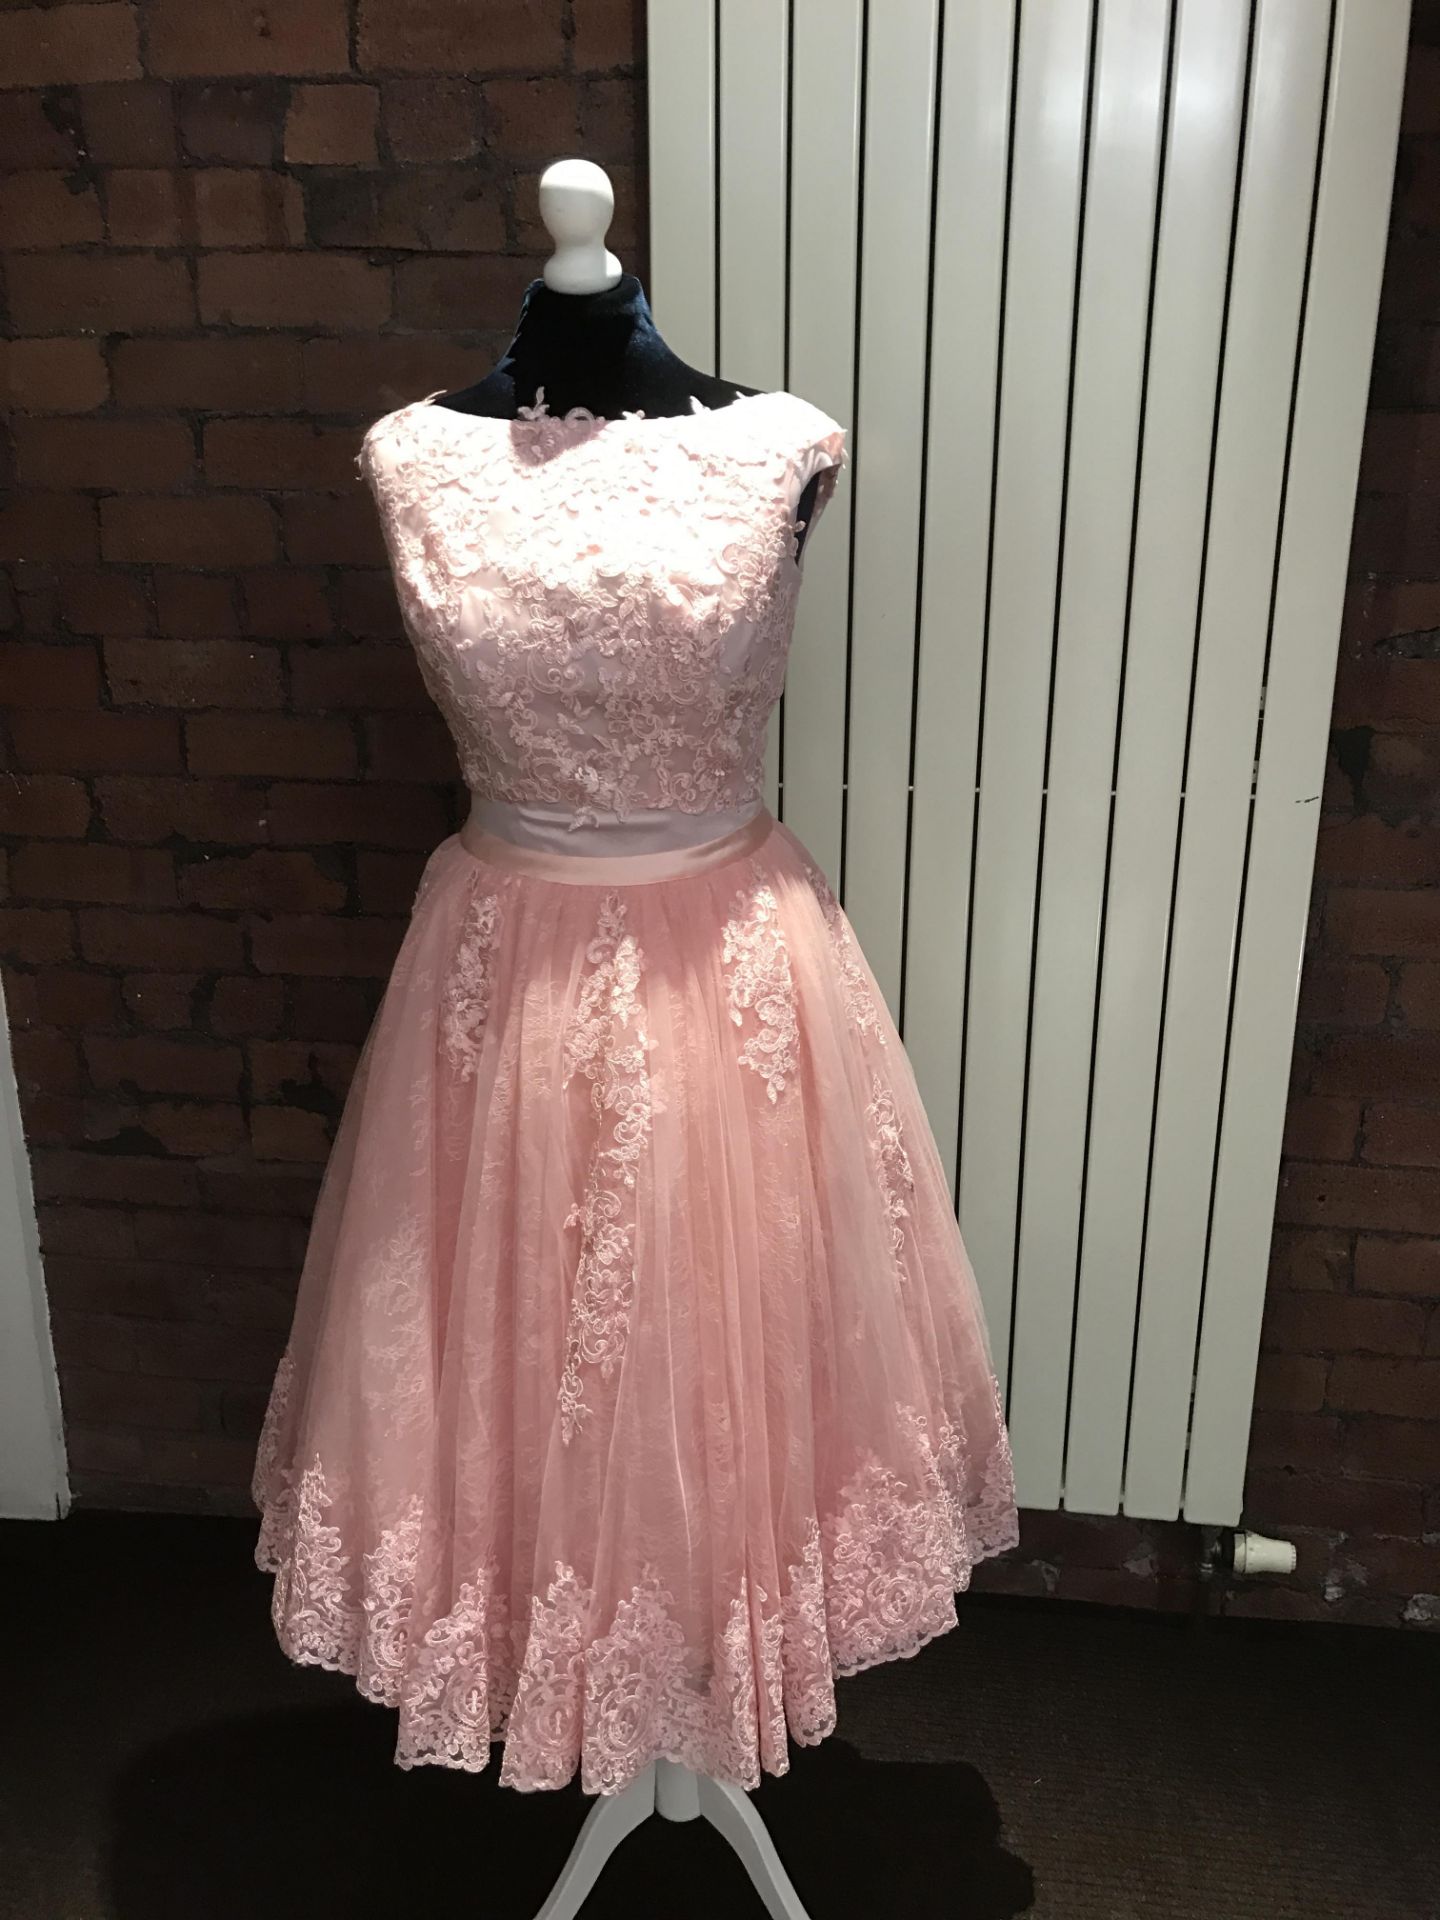 New Calf Length Vintage Inspired Lace Bridesmaid/Occasional Skirt in Blush size 10. ONLY THE SKIRT